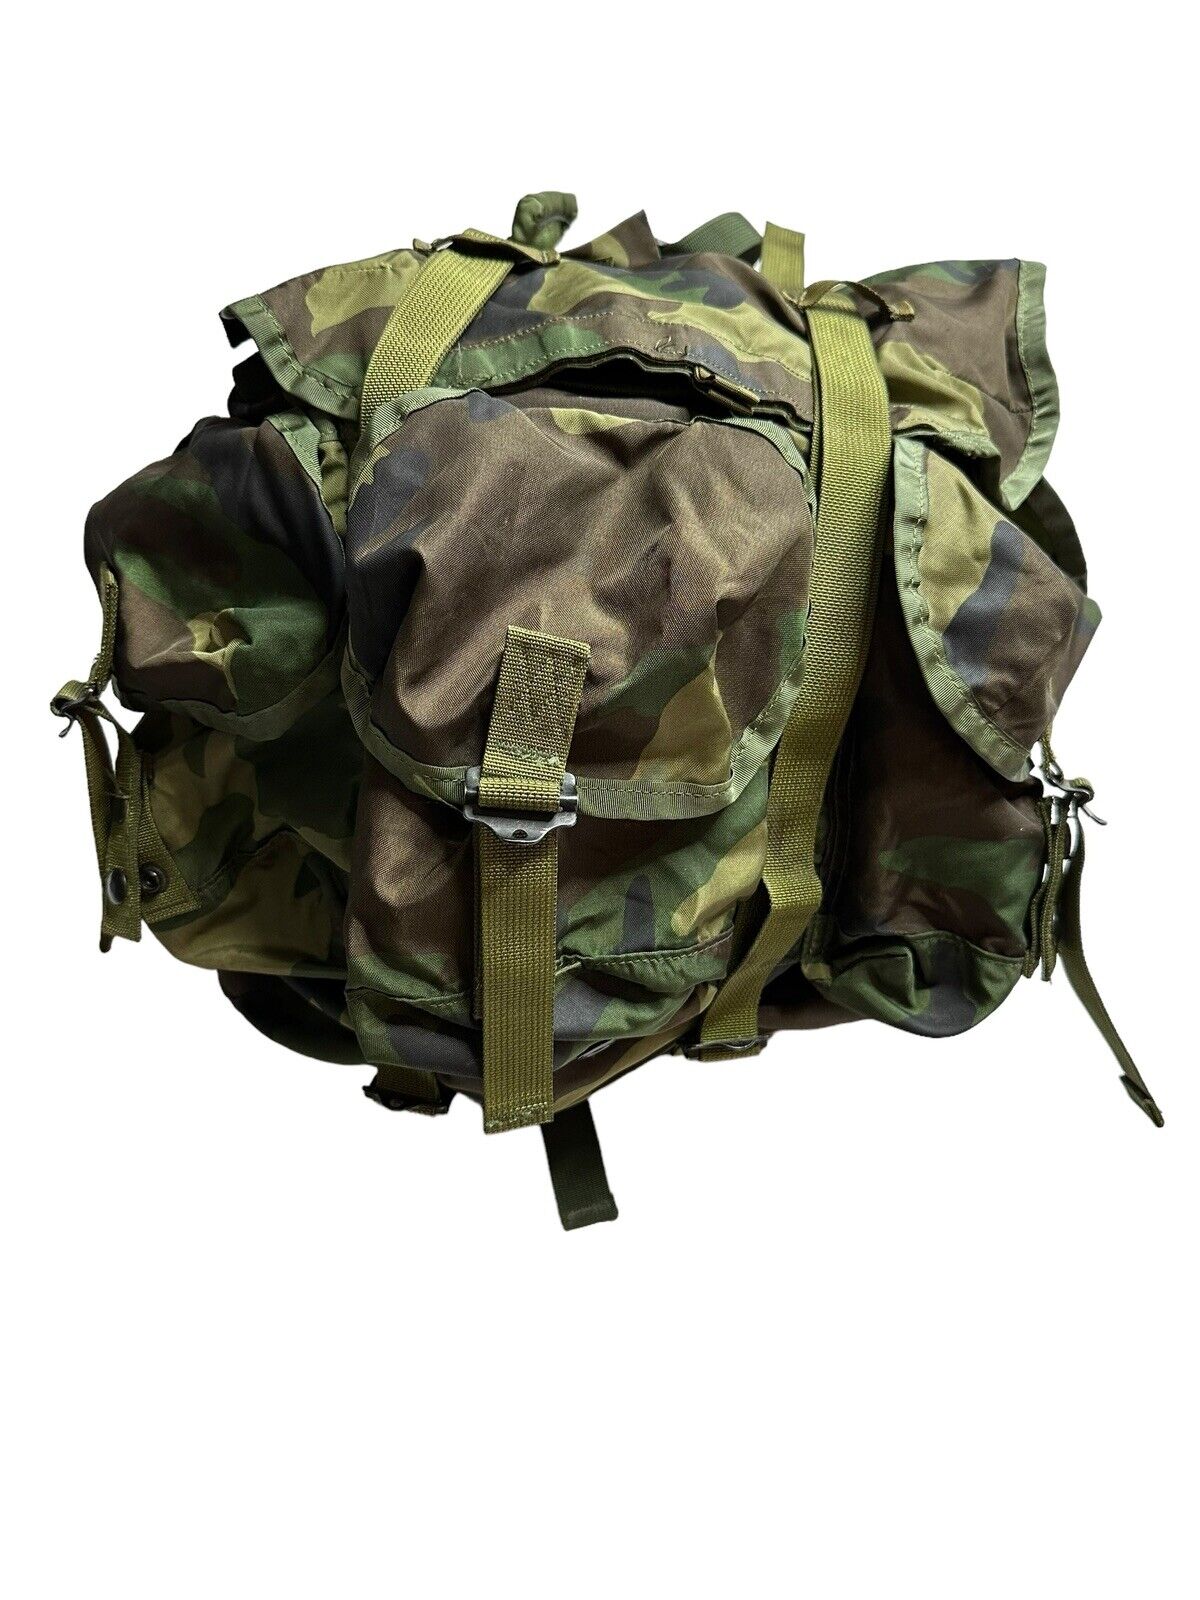 US Military Medium Woodland ALICE Pack With a Shoulder Straps